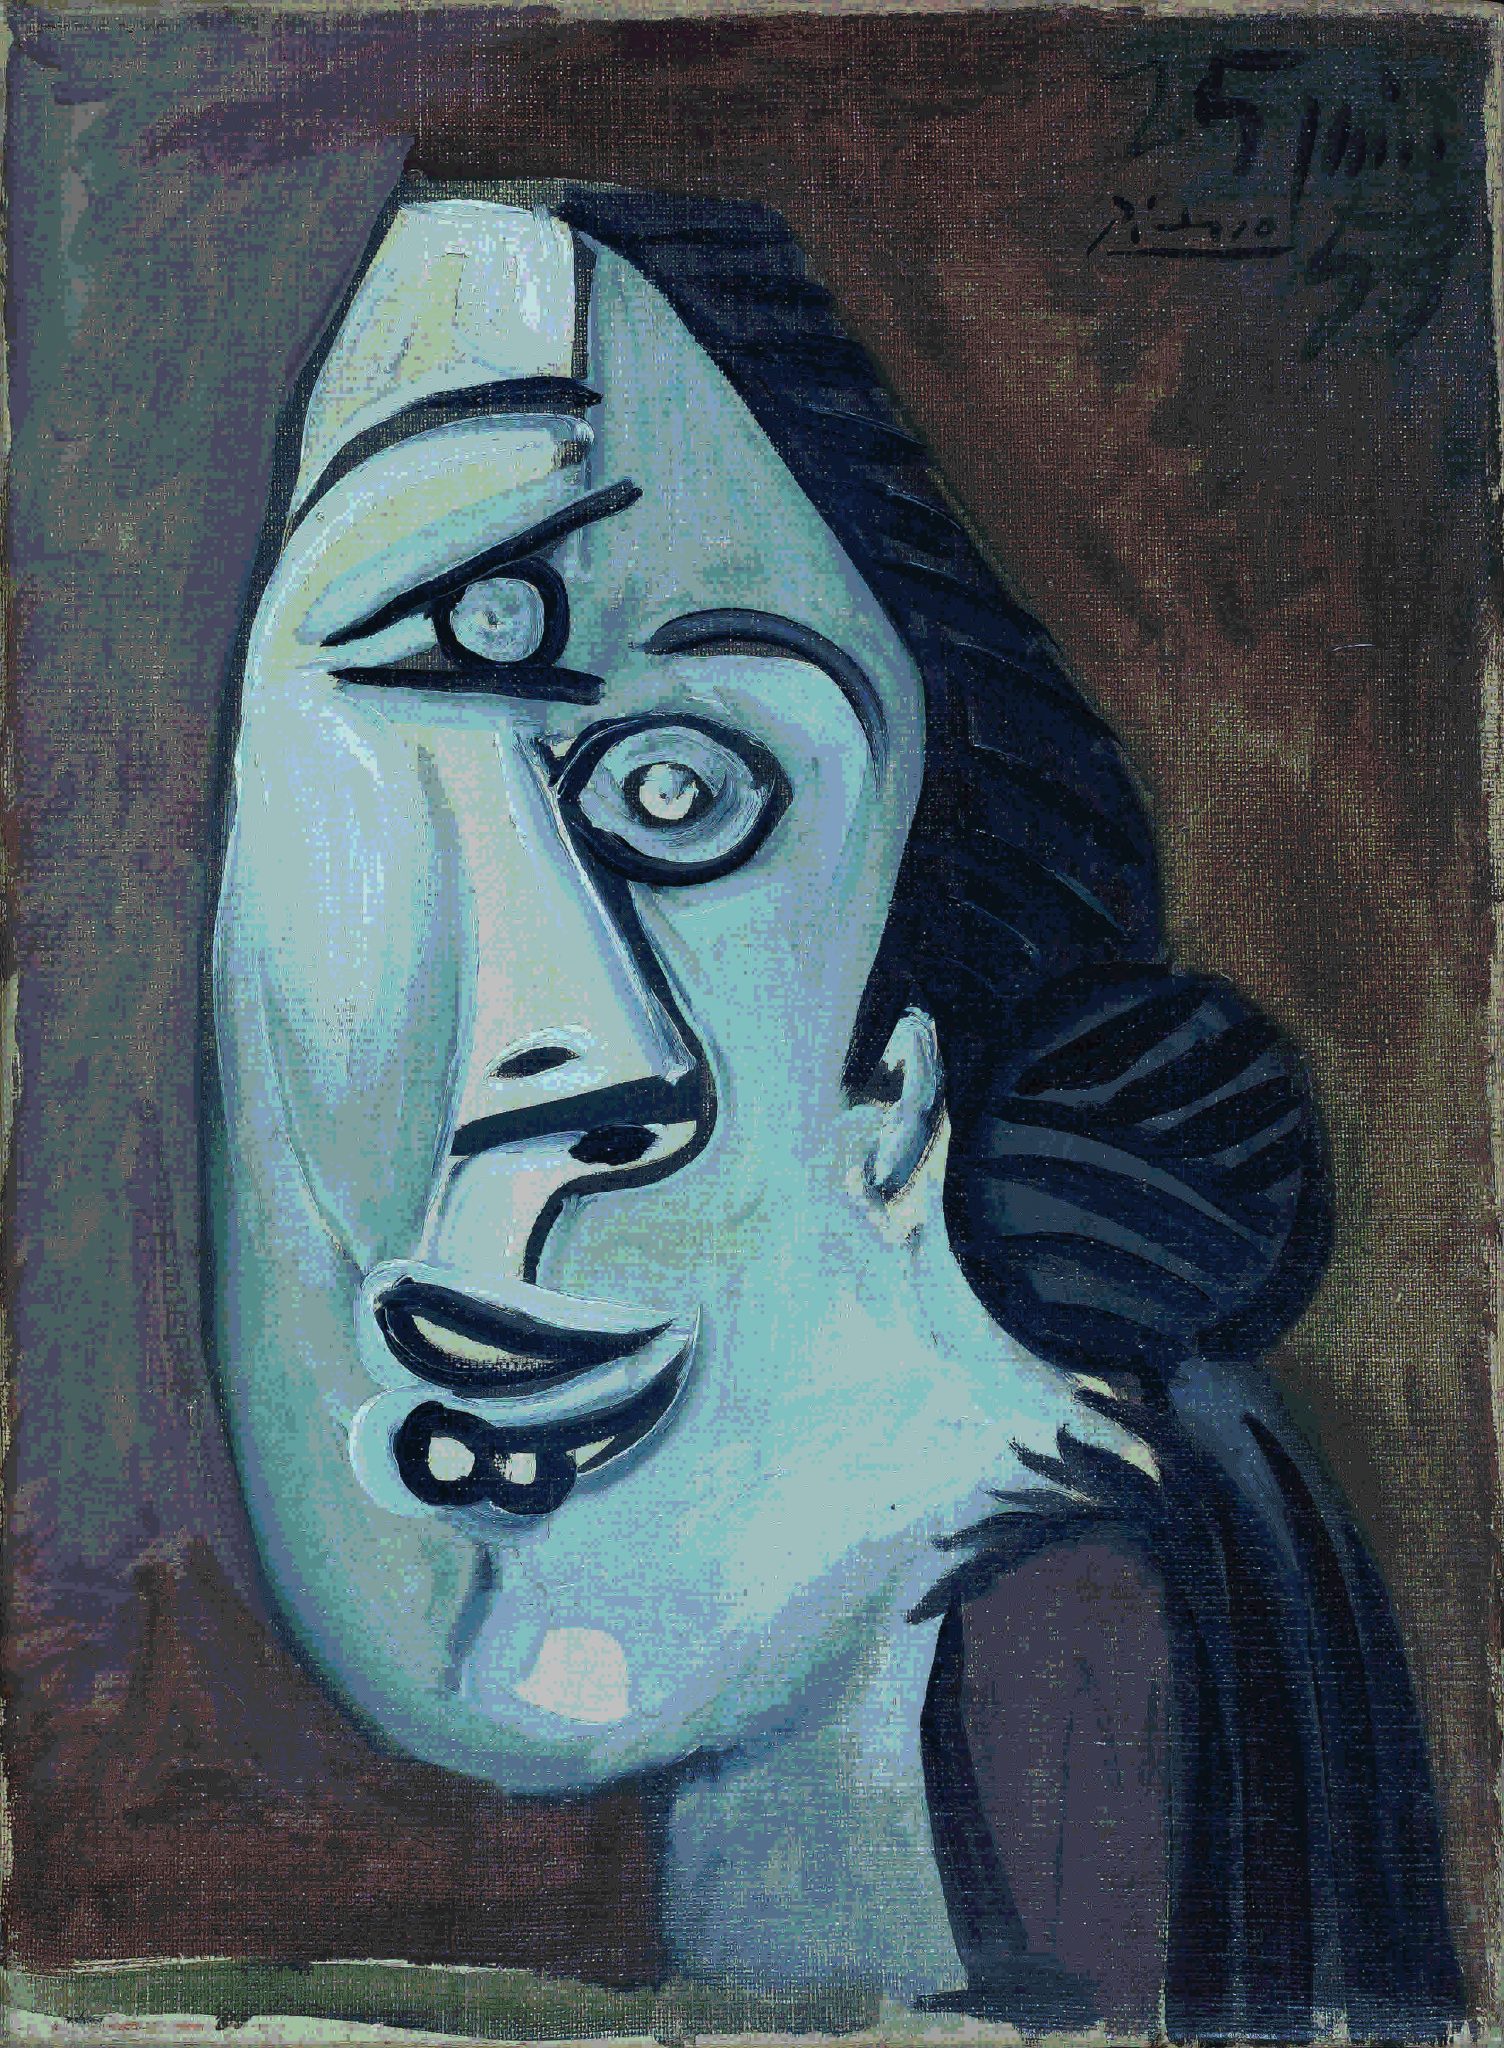 Pablo Picasso, Head of Women, 1953, Signed Picasso and dated 25 June 53 (upper right), Oil on canvas, 33 x 24 cm 